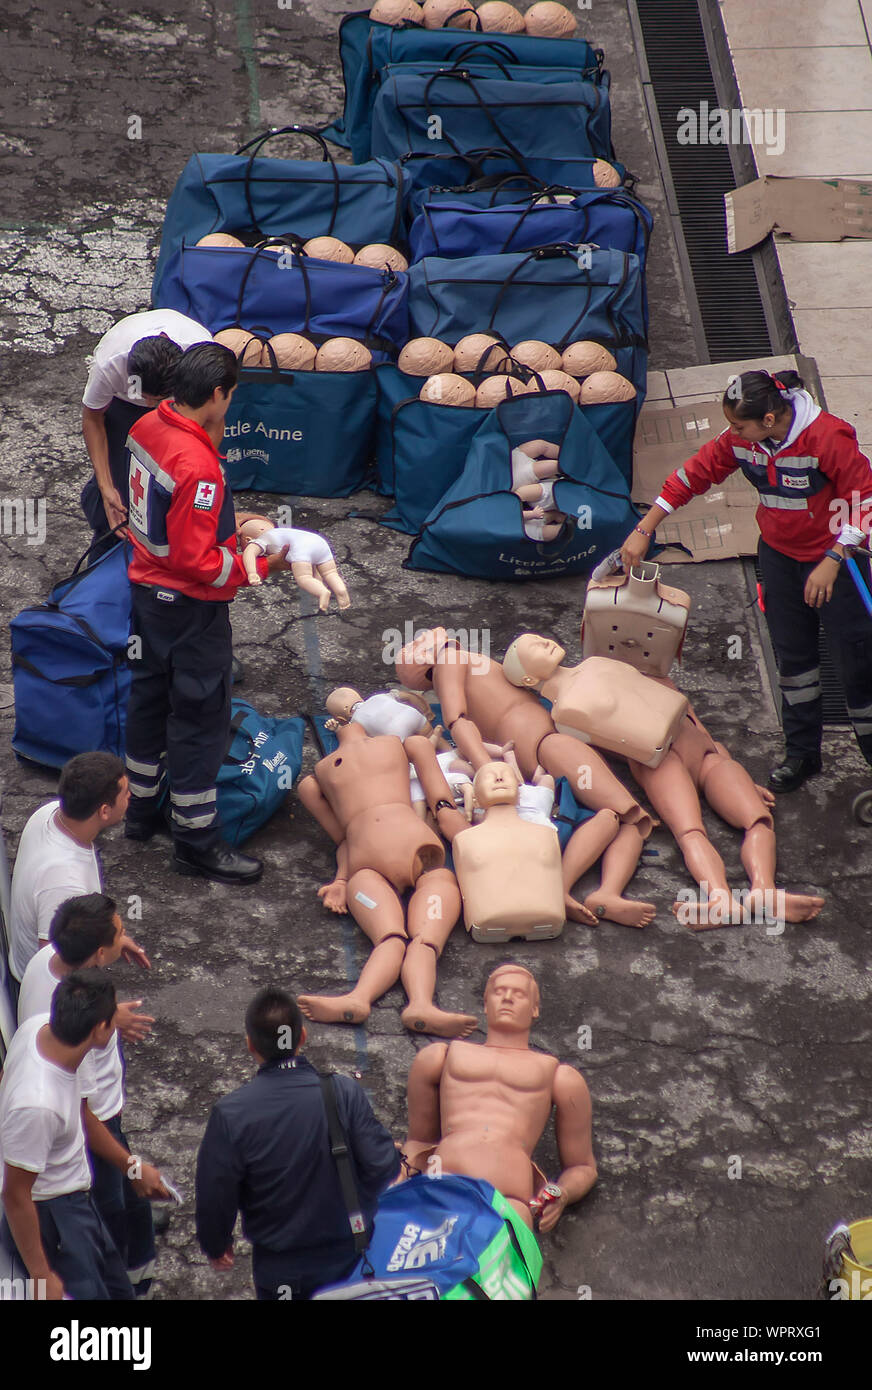 First Aid dummies arrive at Mexican Red Cross HQ Stock Photo